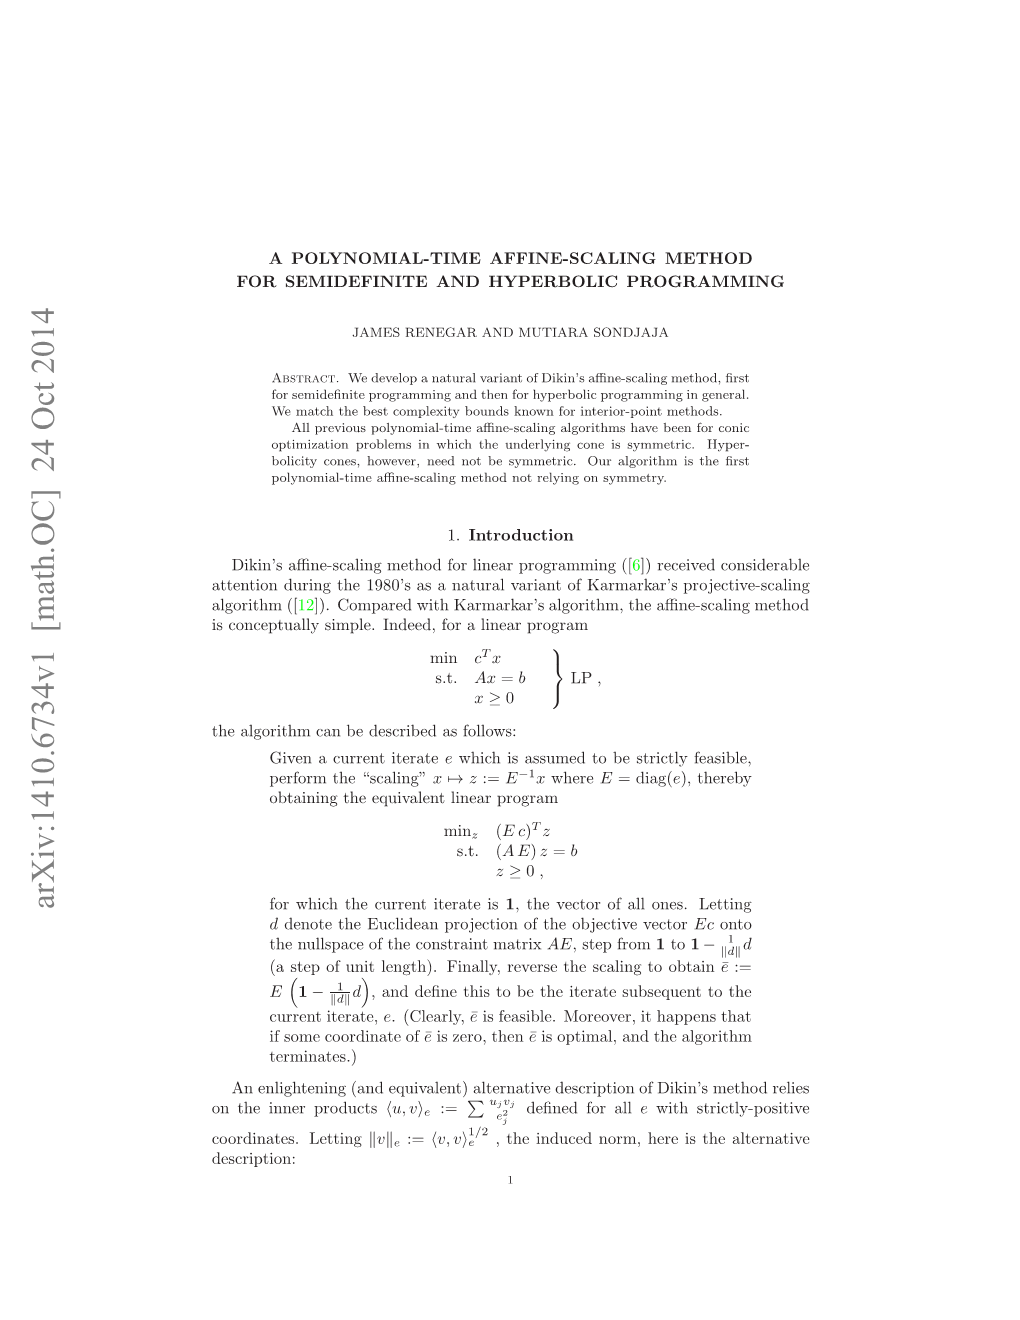 A Polynomial-Time Affine-Scaling Method for Semidefinite And